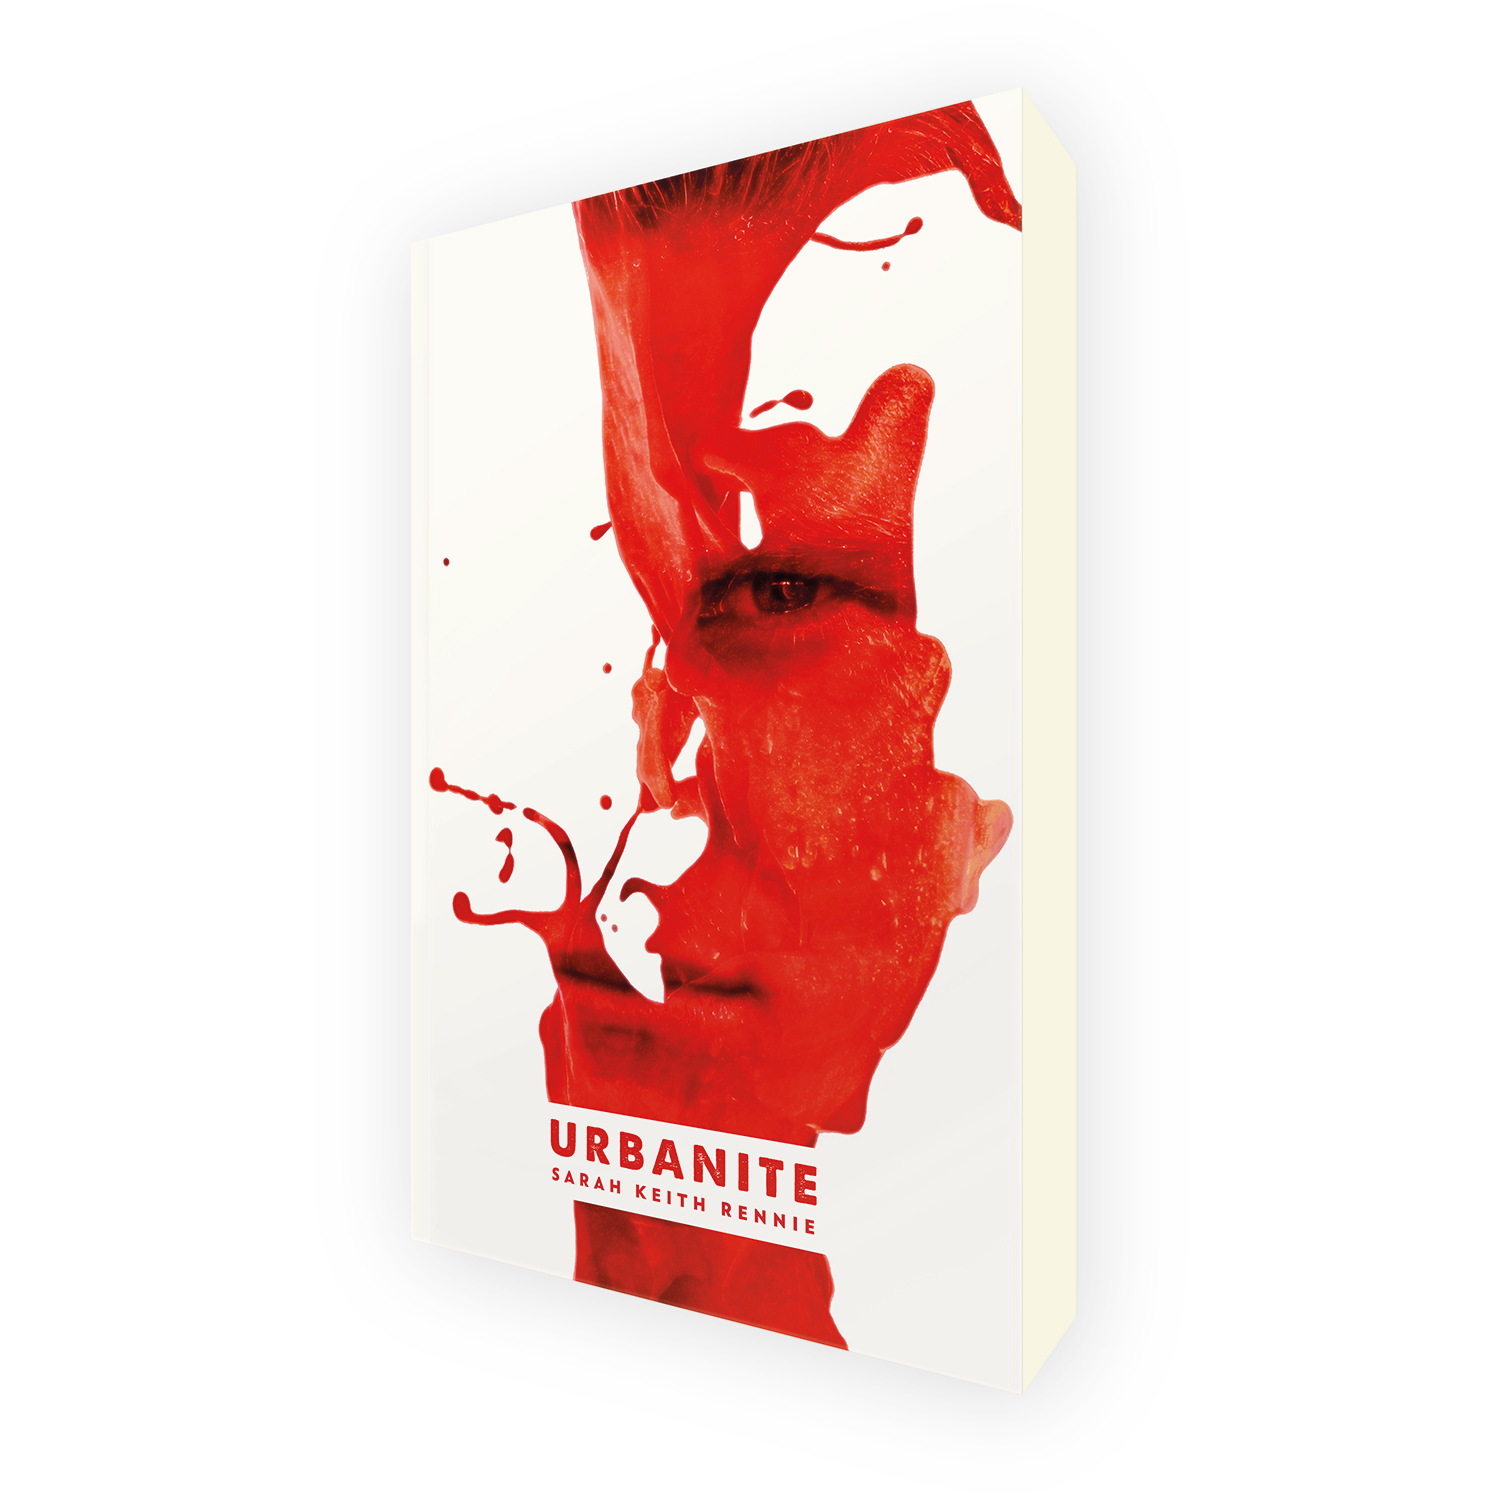 'Urbanite' is a bespoke cover design for a modern horror thriller. The book cover was designed by Mark Thomas, of coverness.com. To find out more about my book design services, please visit www.coverness.com.